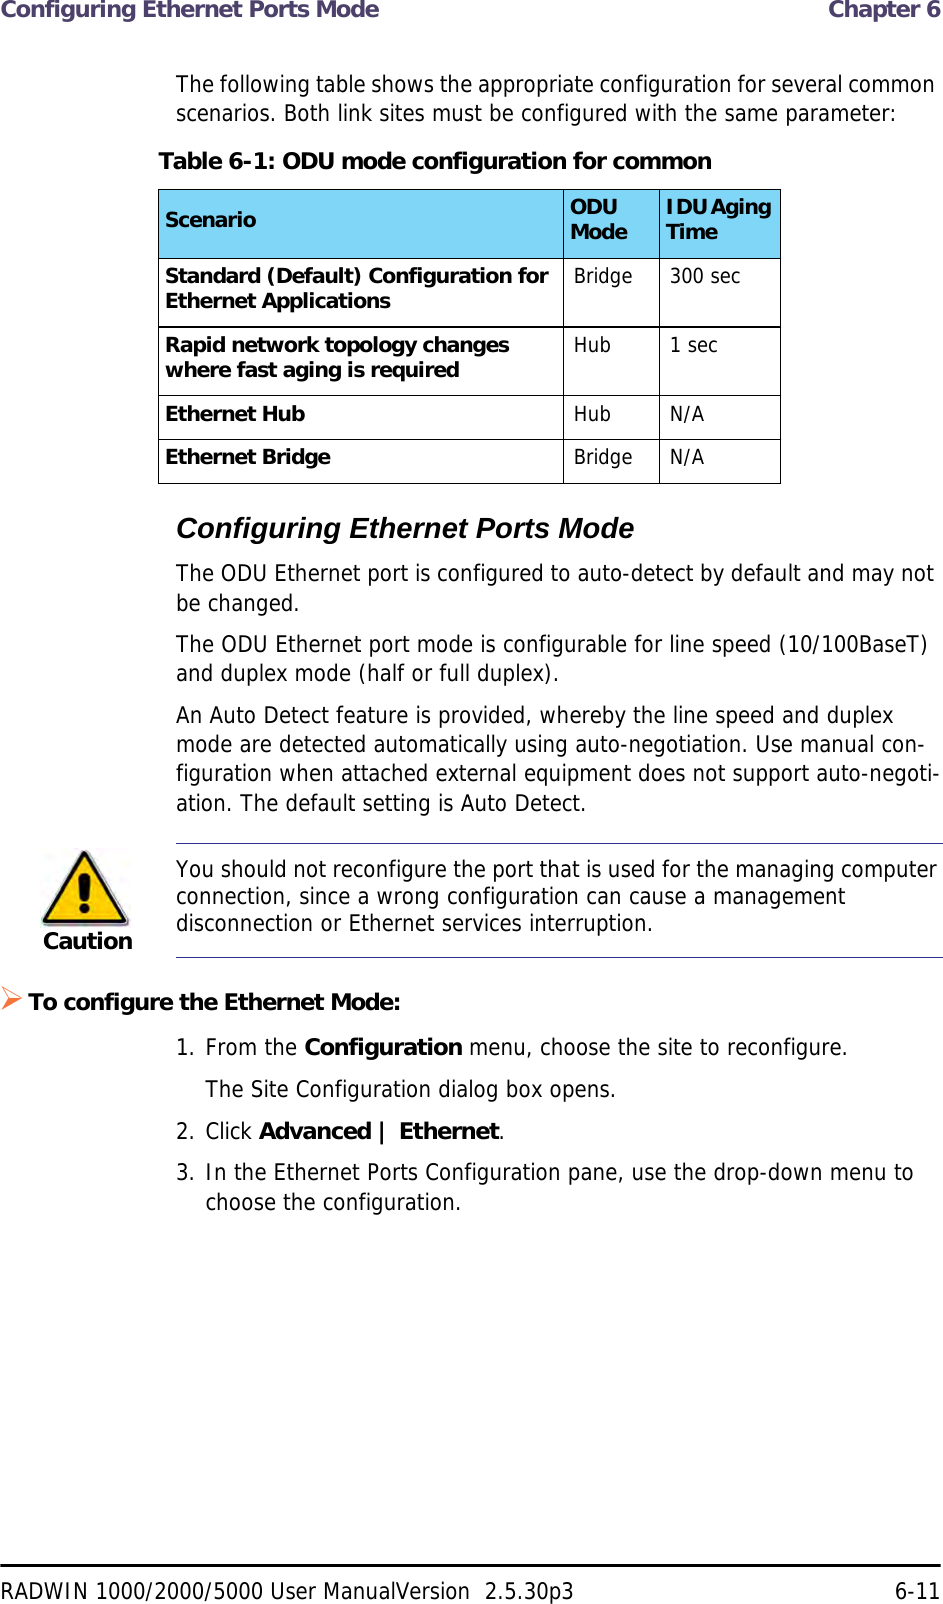 Configuring Ethernet Ports Mode  Chapter 6RADWIN 1000/2000/5000 User ManualVersion  2.5.30p3 6-11The following table shows the appropriate configuration for several common scenarios. Both link sites must be configured with the same parameter:Configuring Ethernet Ports ModeThe ODU Ethernet port is configured to auto-detect by default and may not be changed.The ODU Ethernet port mode is configurable for line speed (10/100BaseT) and duplex mode (half or full duplex).An Auto Detect feature is provided, whereby the line speed and duplex mode are detected automatically using auto-negotiation. Use manual con-figuration when attached external equipment does not support auto-negoti-ation. The default setting is Auto Detect.To configure the Ethernet Mode:1. From the Configuration menu, choose the site to reconfigure.The Site Configuration dialog box opens.2. Click Advanced | Ethernet.3. In the Ethernet Ports Configuration pane, use the drop-down menu to choose the configuration.Table 6-1: ODU mode configuration for commonScenario ODU Mode IDU Aging TimeStandard (Default) Configuration for Ethernet Applications Bridge 300 secRapid network topology changes where fast aging is required Hub 1 secEthernet Hub Hub N/AEthernet Bridge Bridge N/ACautionYou should not reconfigure the port that is used for the managing computer connection, since a wrong configuration can cause a management disconnection or Ethernet services interruption.